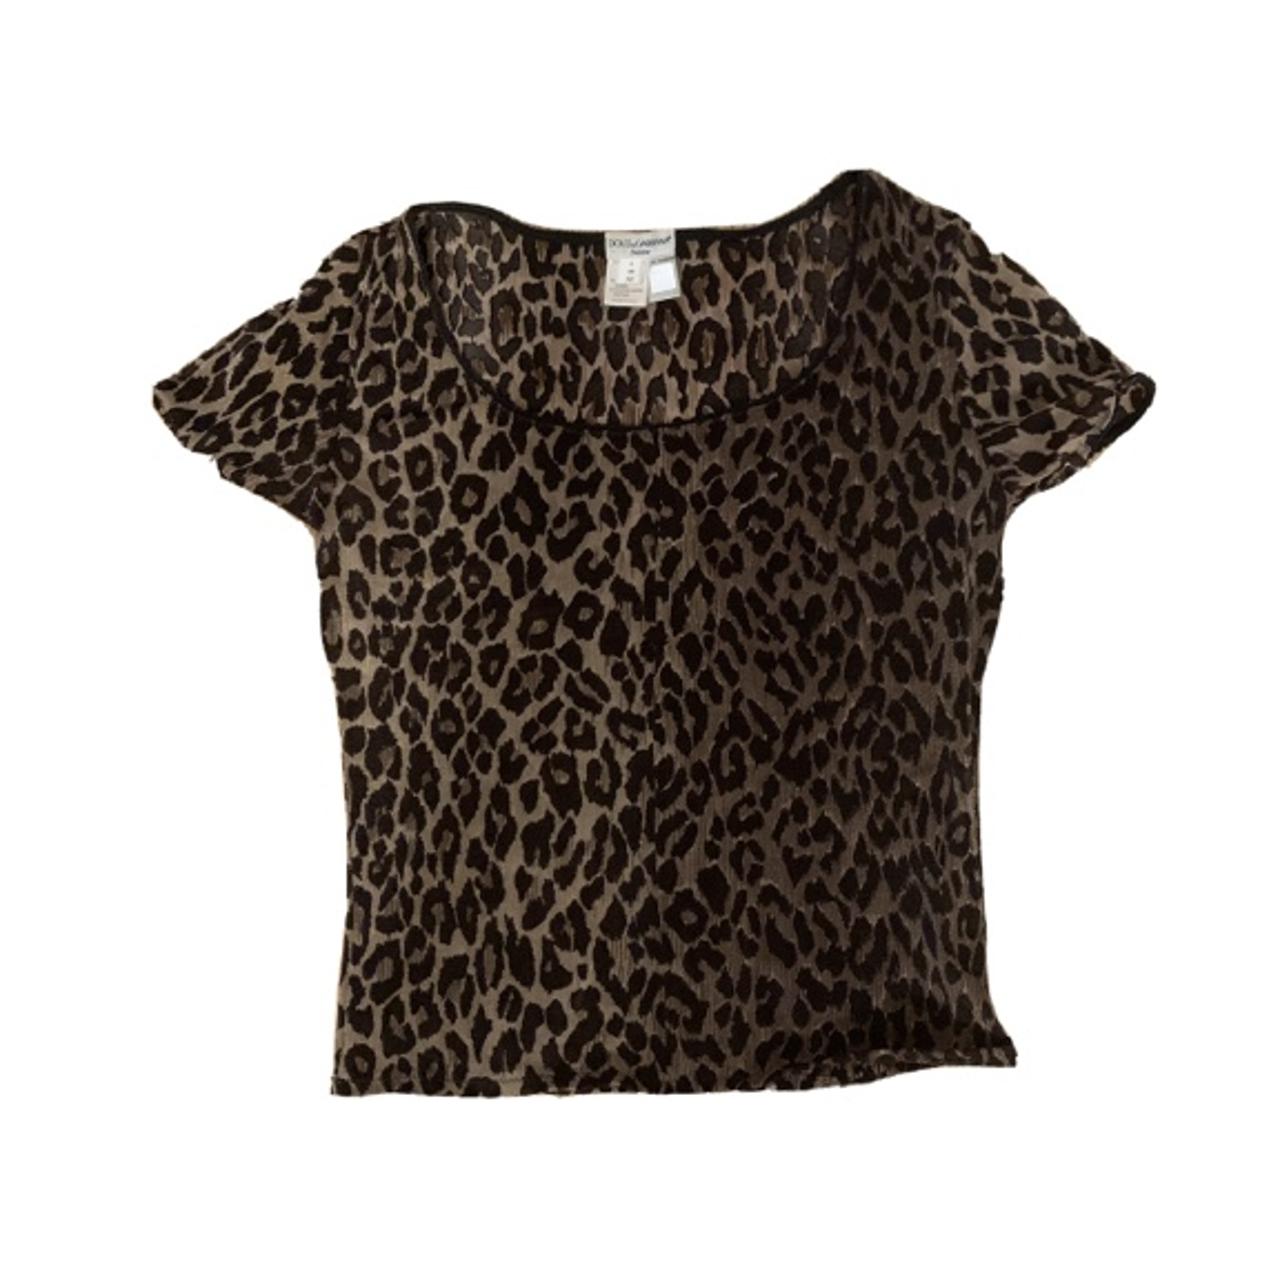 Dolce and gabbana leopard print intimo top Size... - Depop